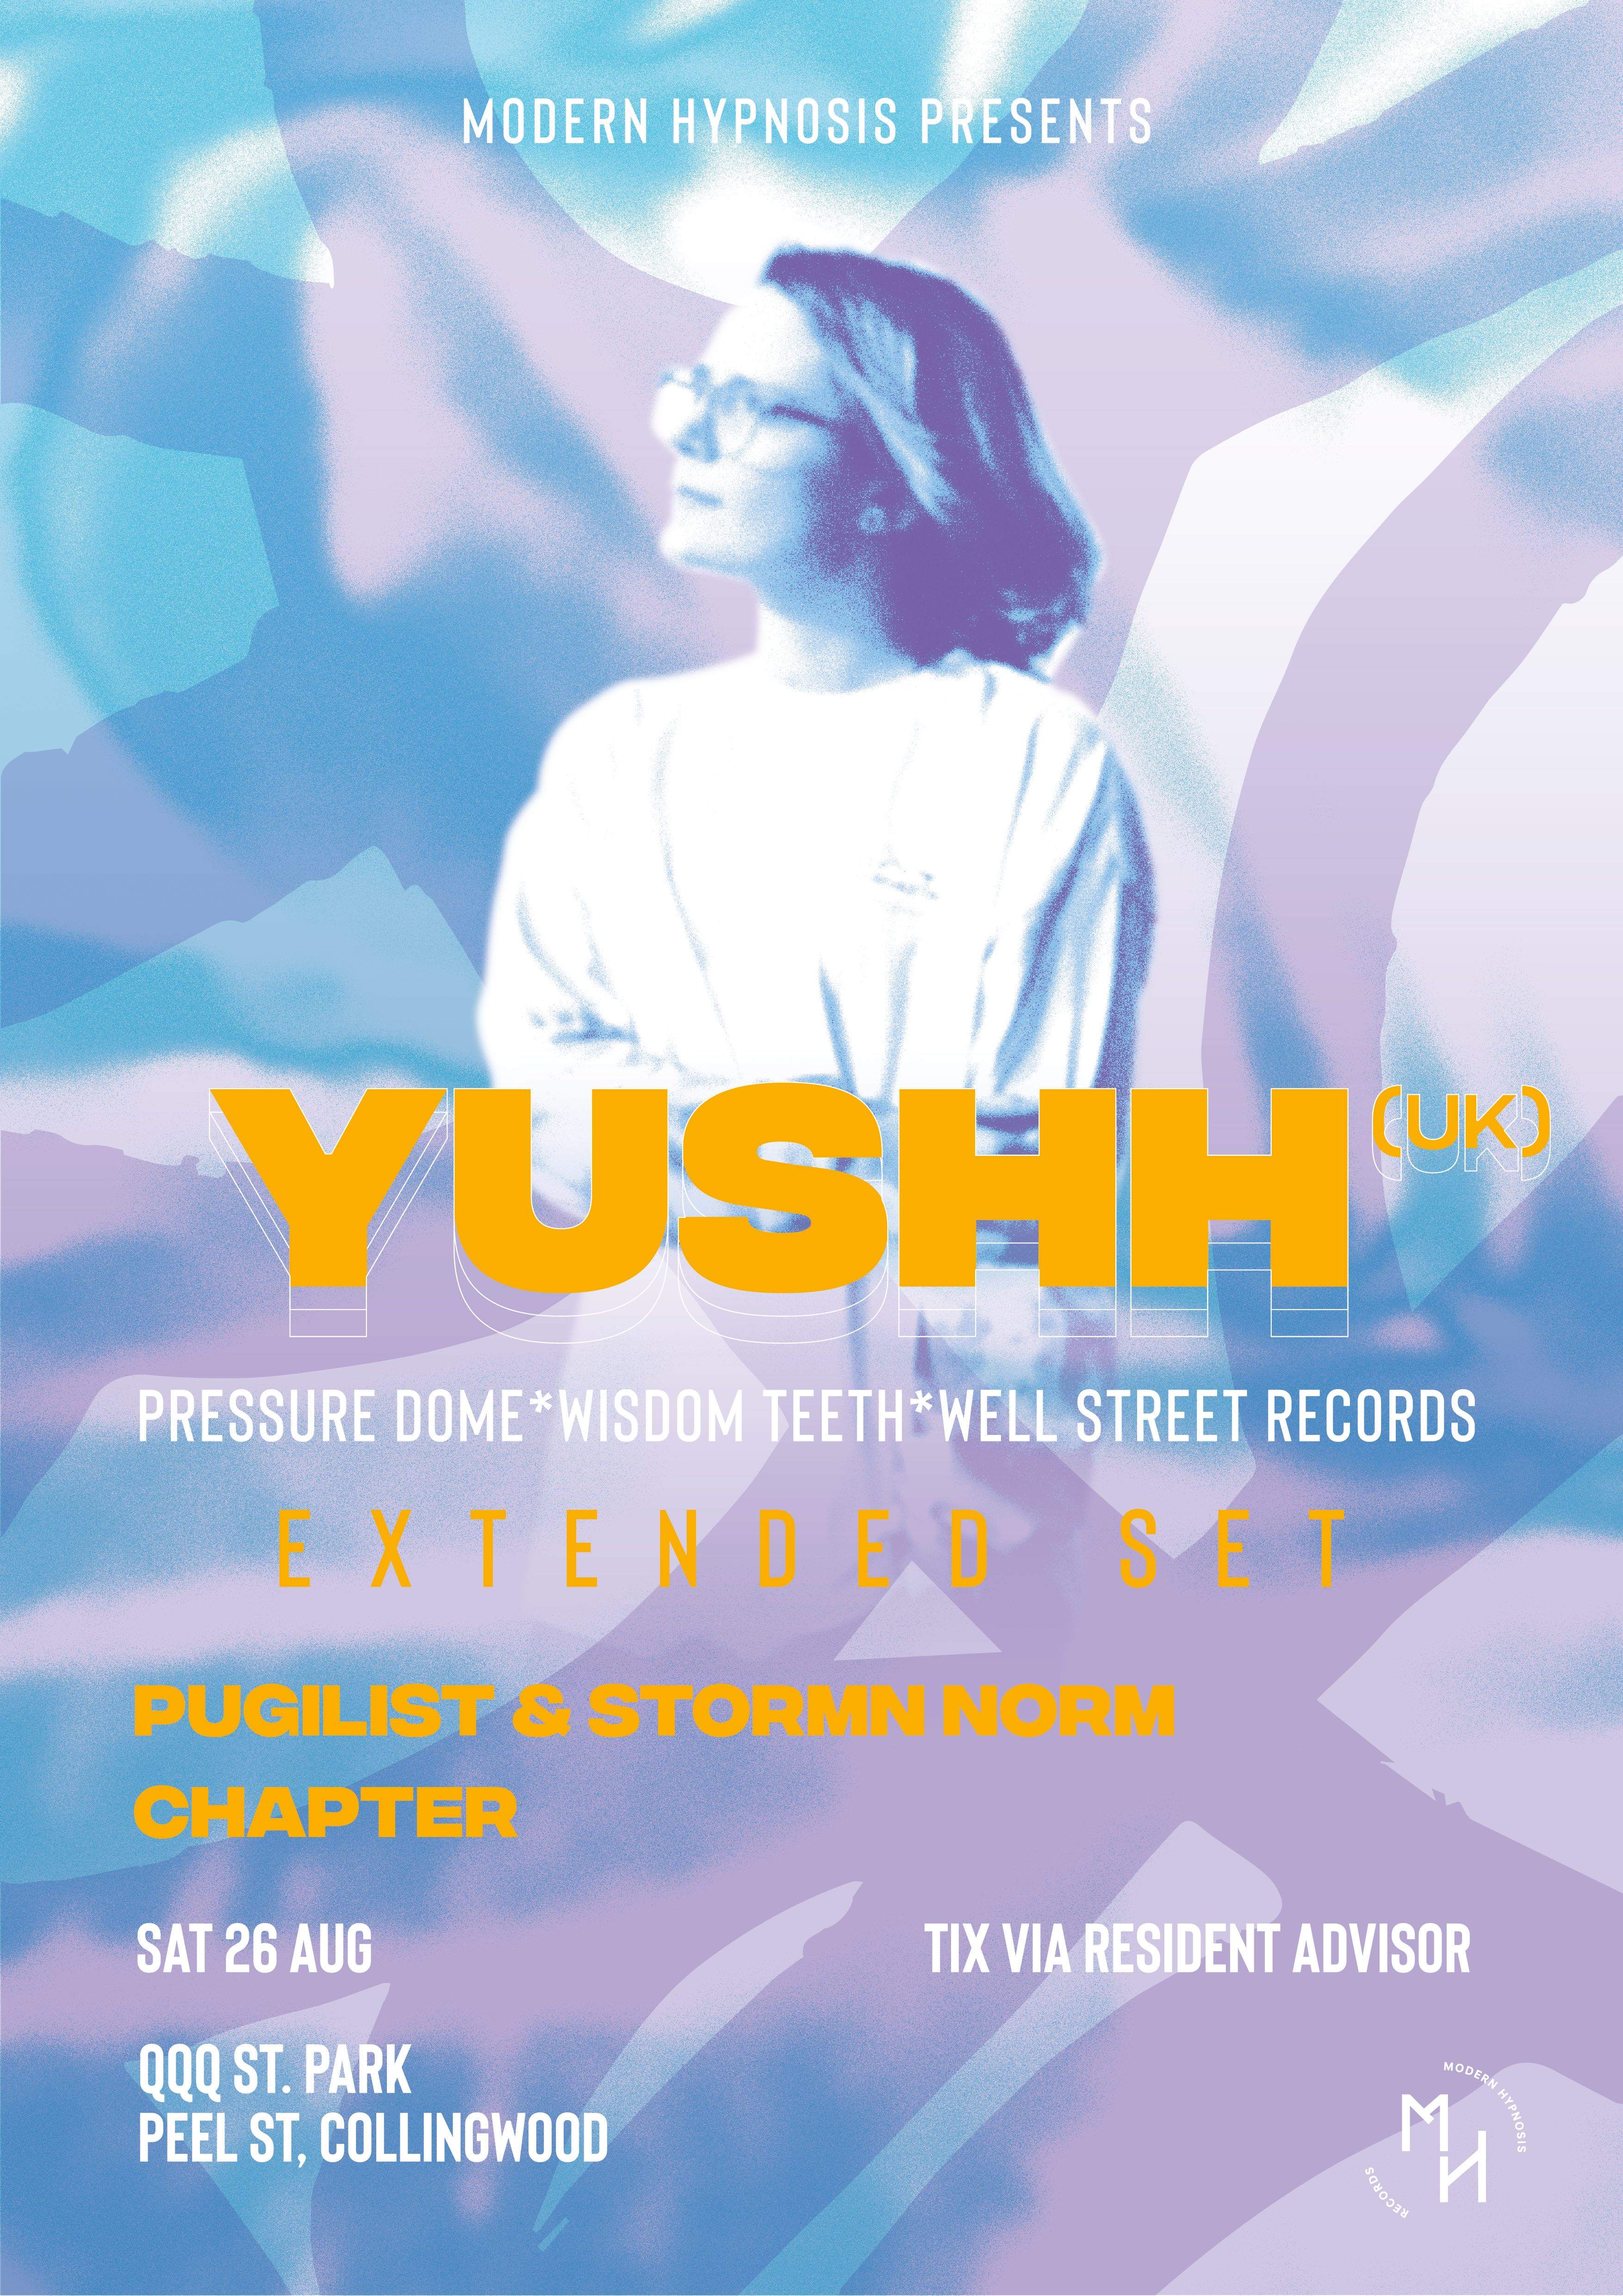 Modern Hypnosis with Yushh (uk) - フライヤー表